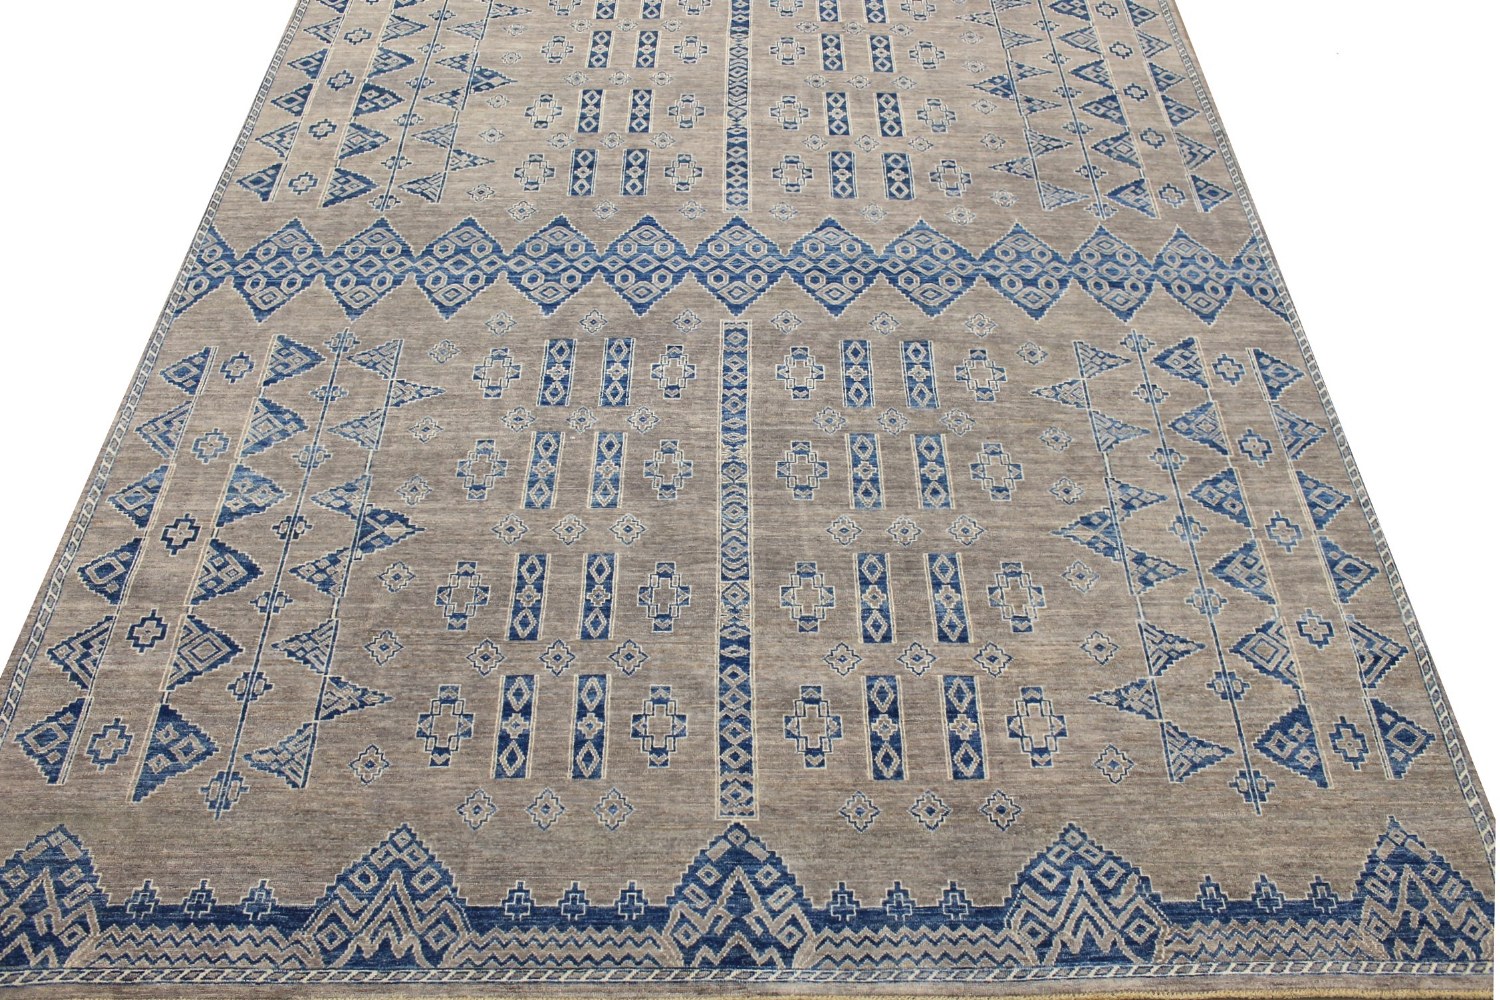 9x12 Tribal Hand Knotted Wool Area Rug - MR026720